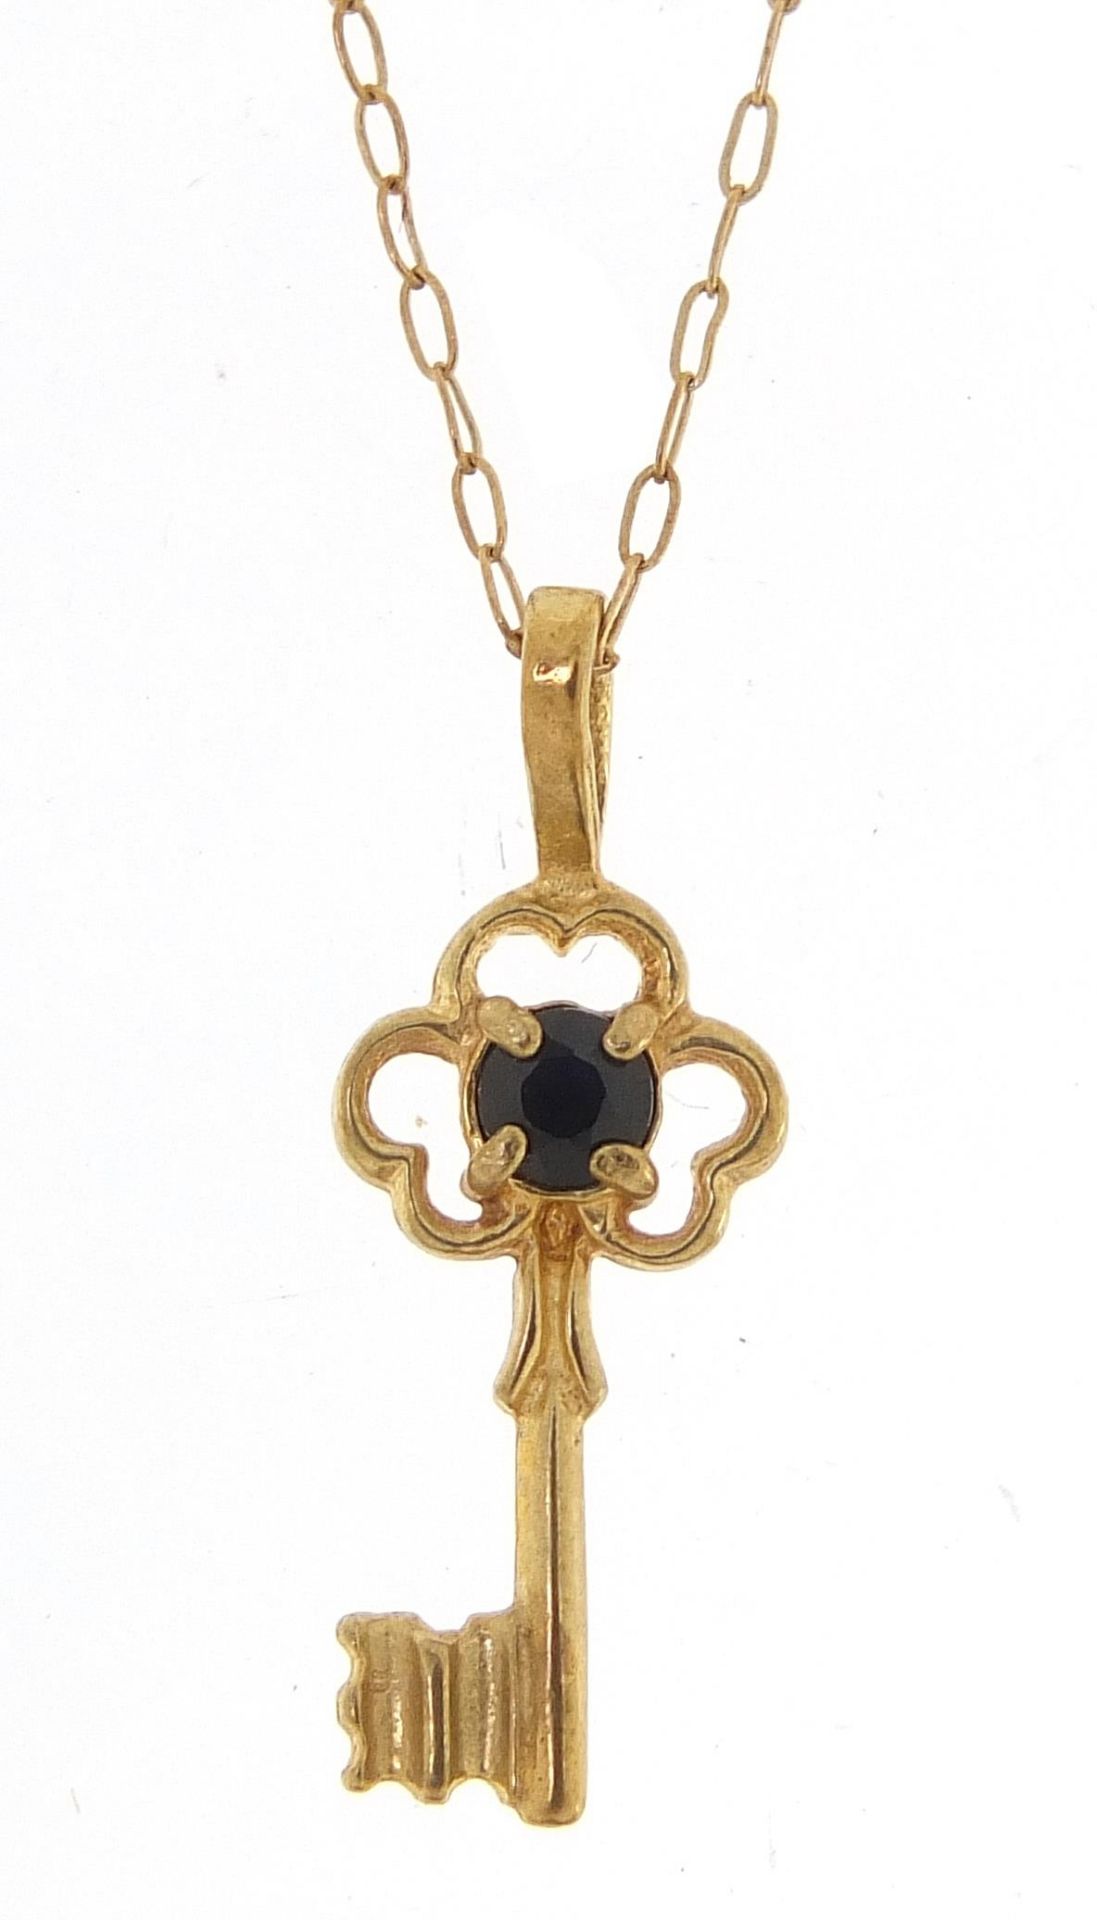 Unmarked gold sapphire key pendant, (tests as 9ct gold) on a 9ct gold necklace, 2cm high and 40cm in